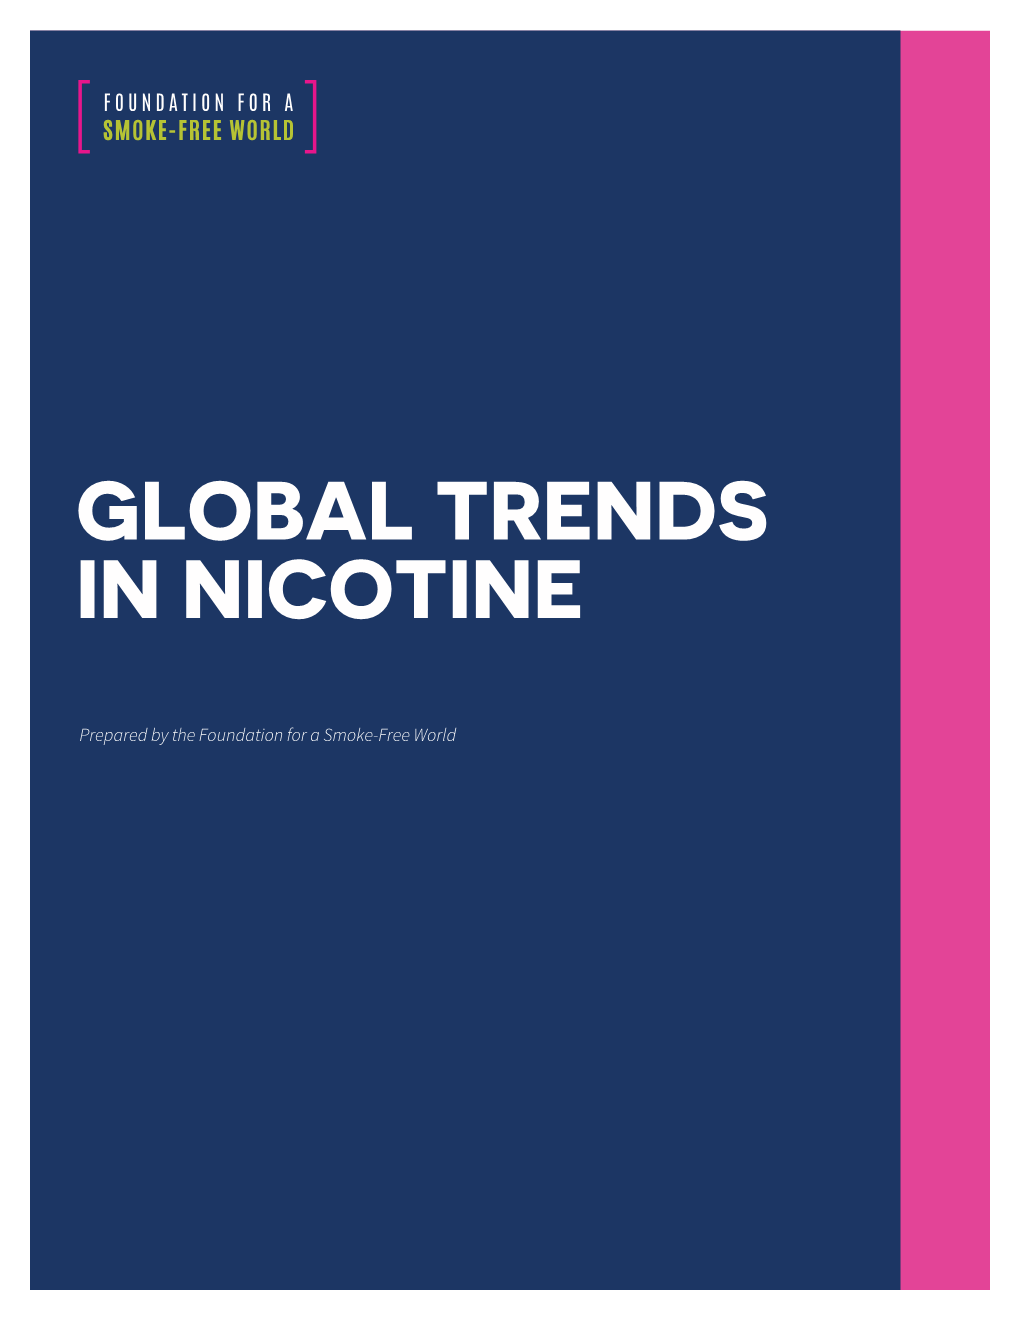 Global Trends in Nicotine